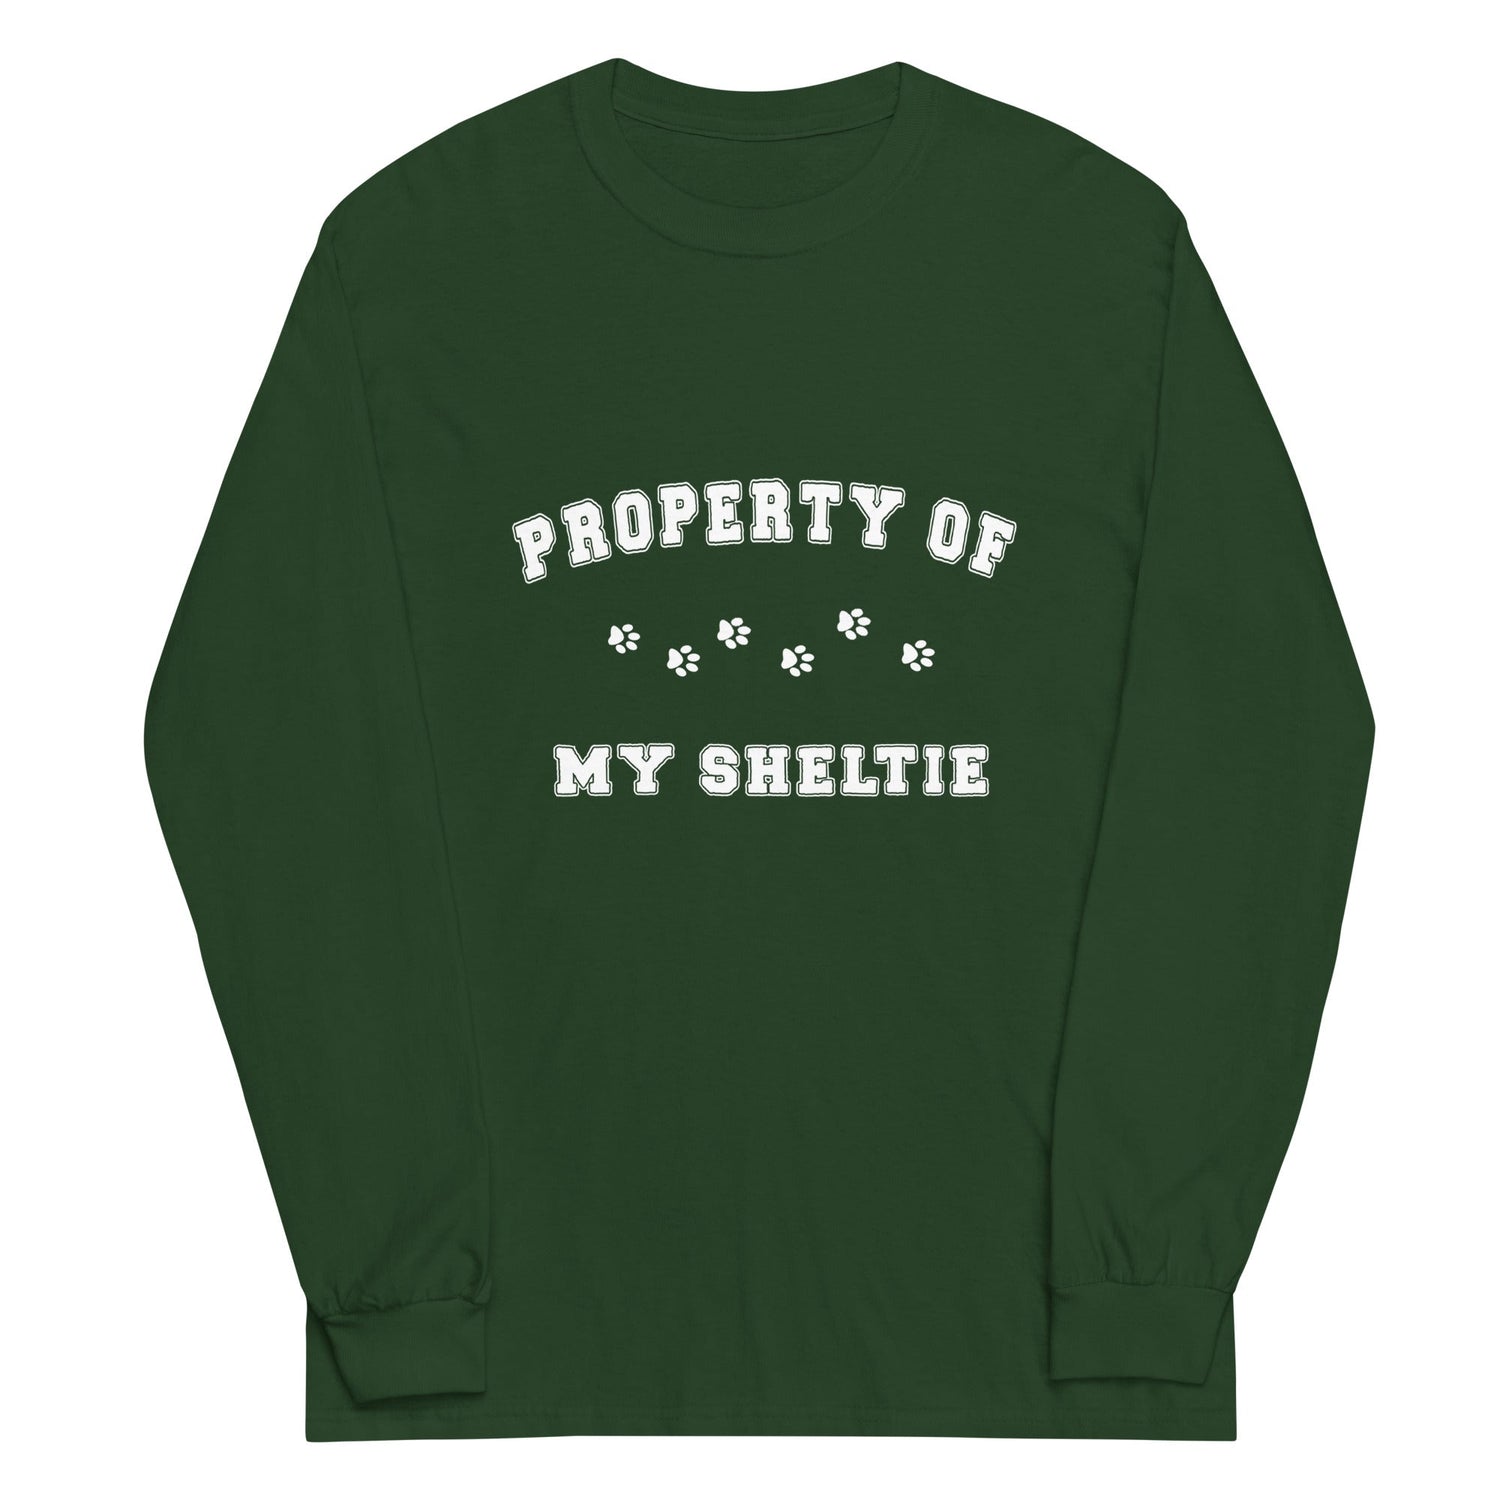 &quot;Property of my Sheltie&quot; Long Sleeve T-shirt For Men&